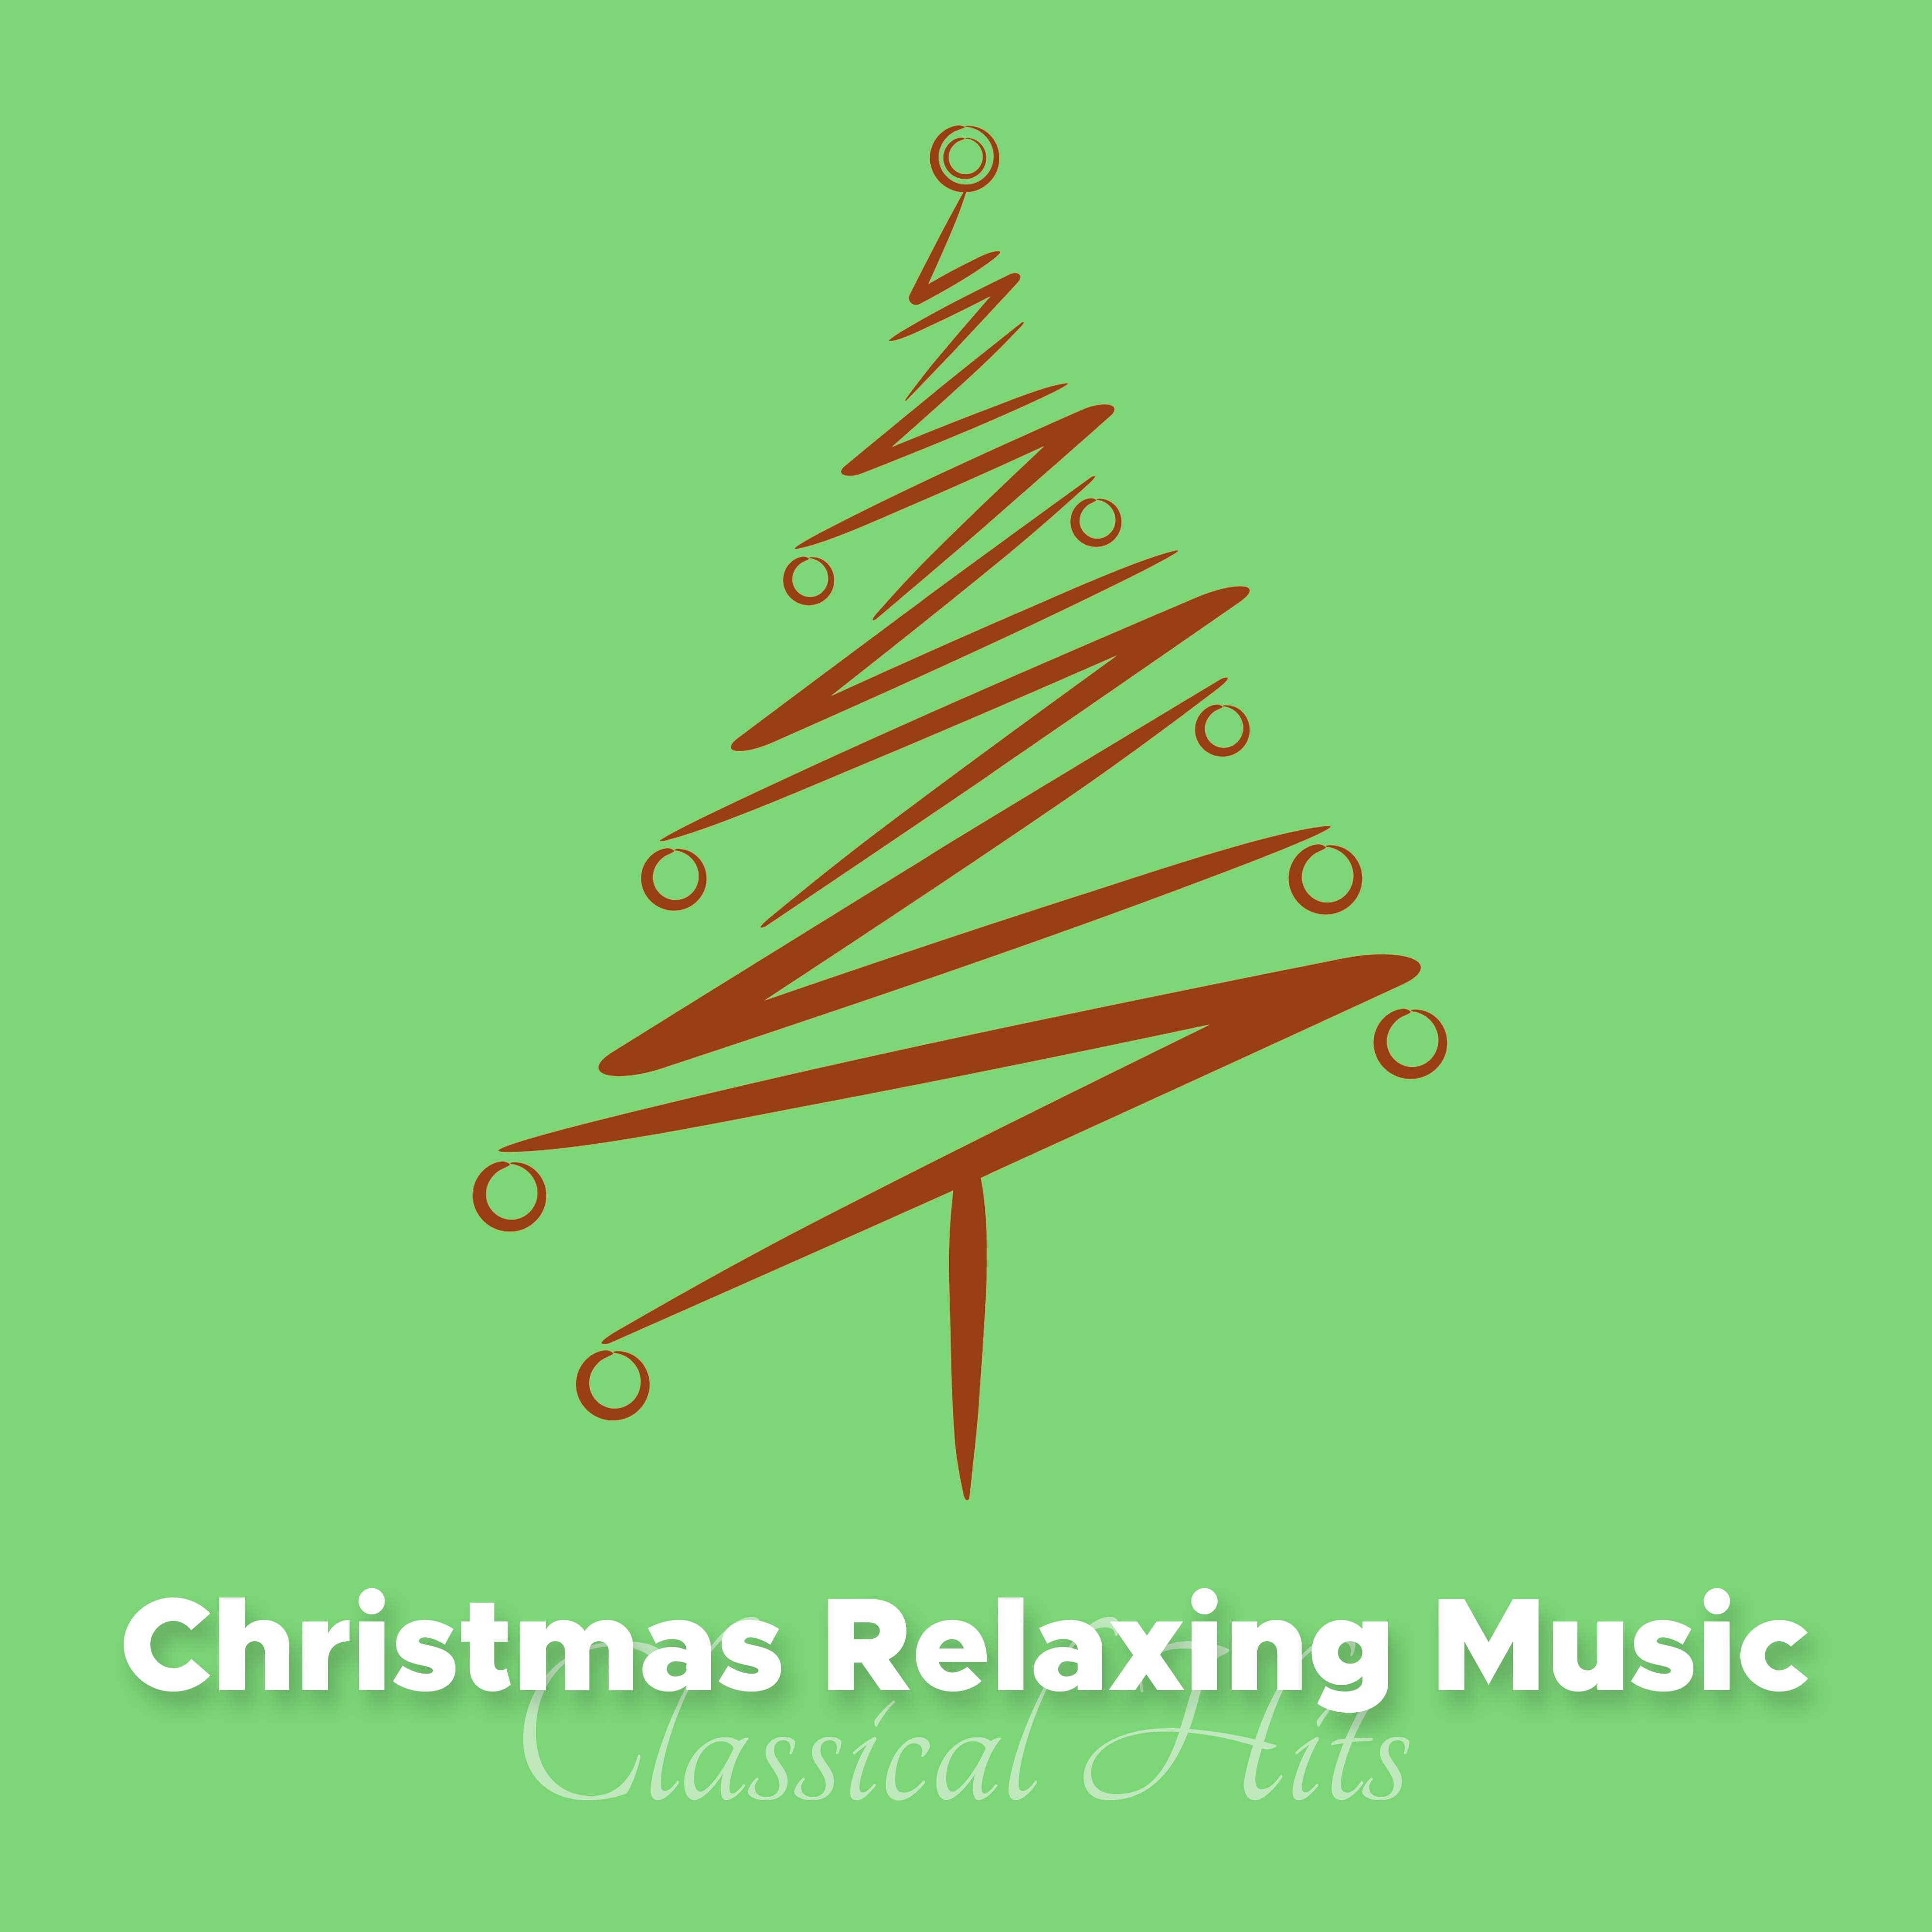 Christmas Relaxing Music: Classical Hits offered in a Modern, Relaxing New Age Rendition